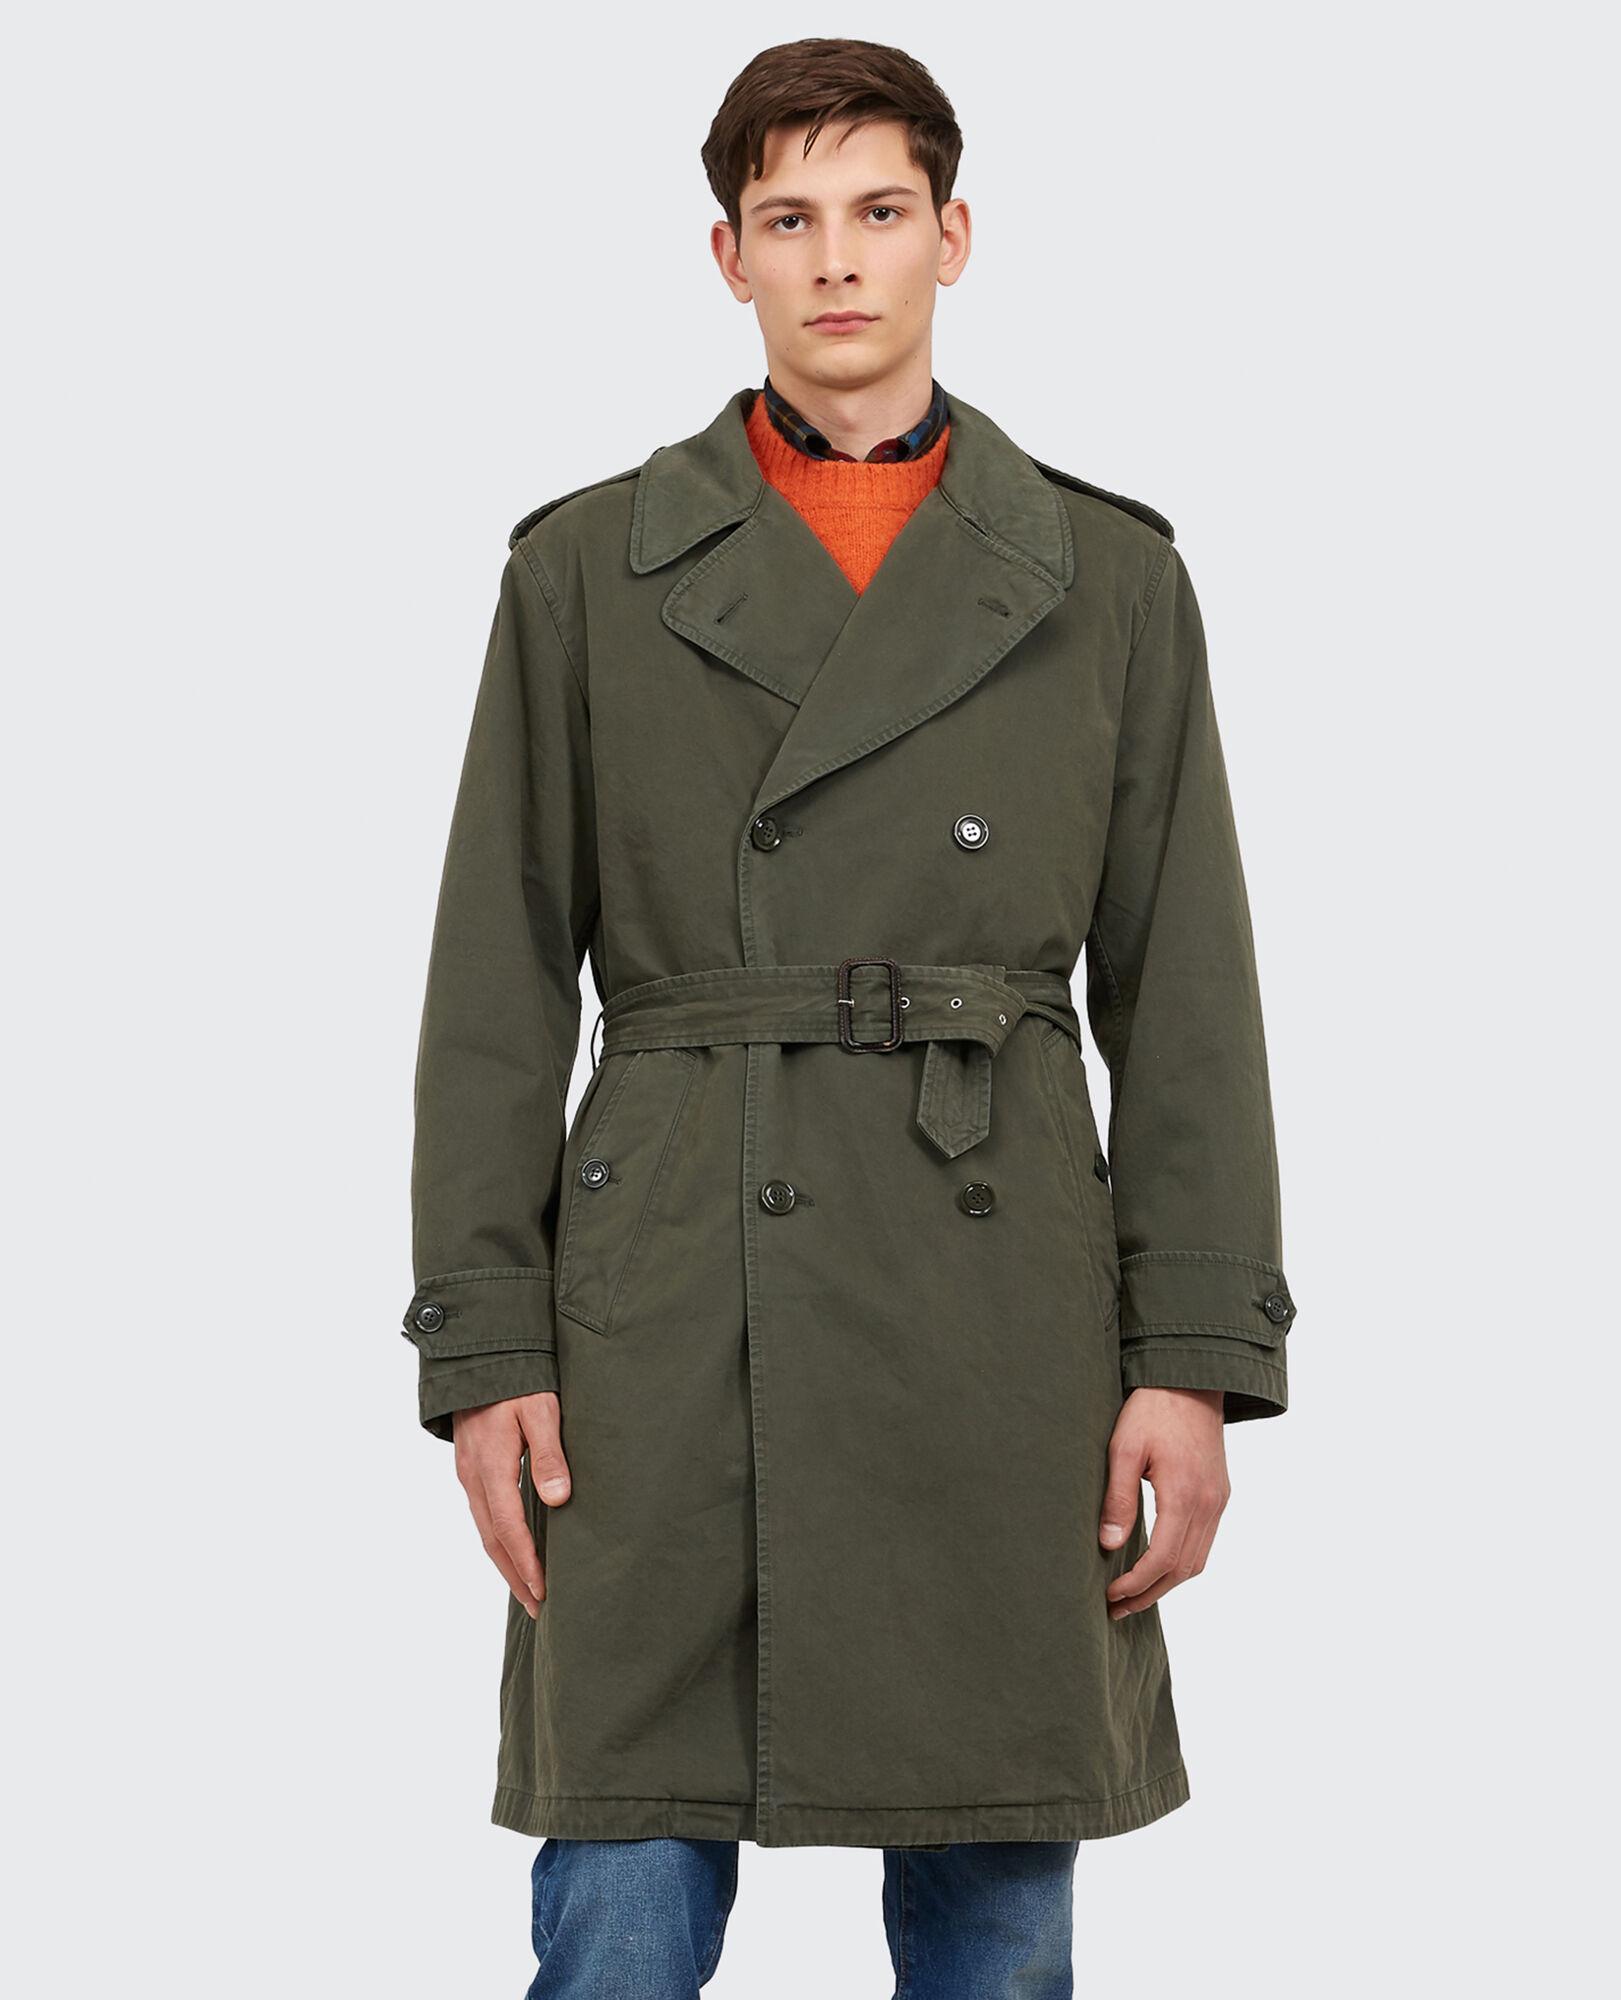 Army Green Trench Coat Mens - Army Military